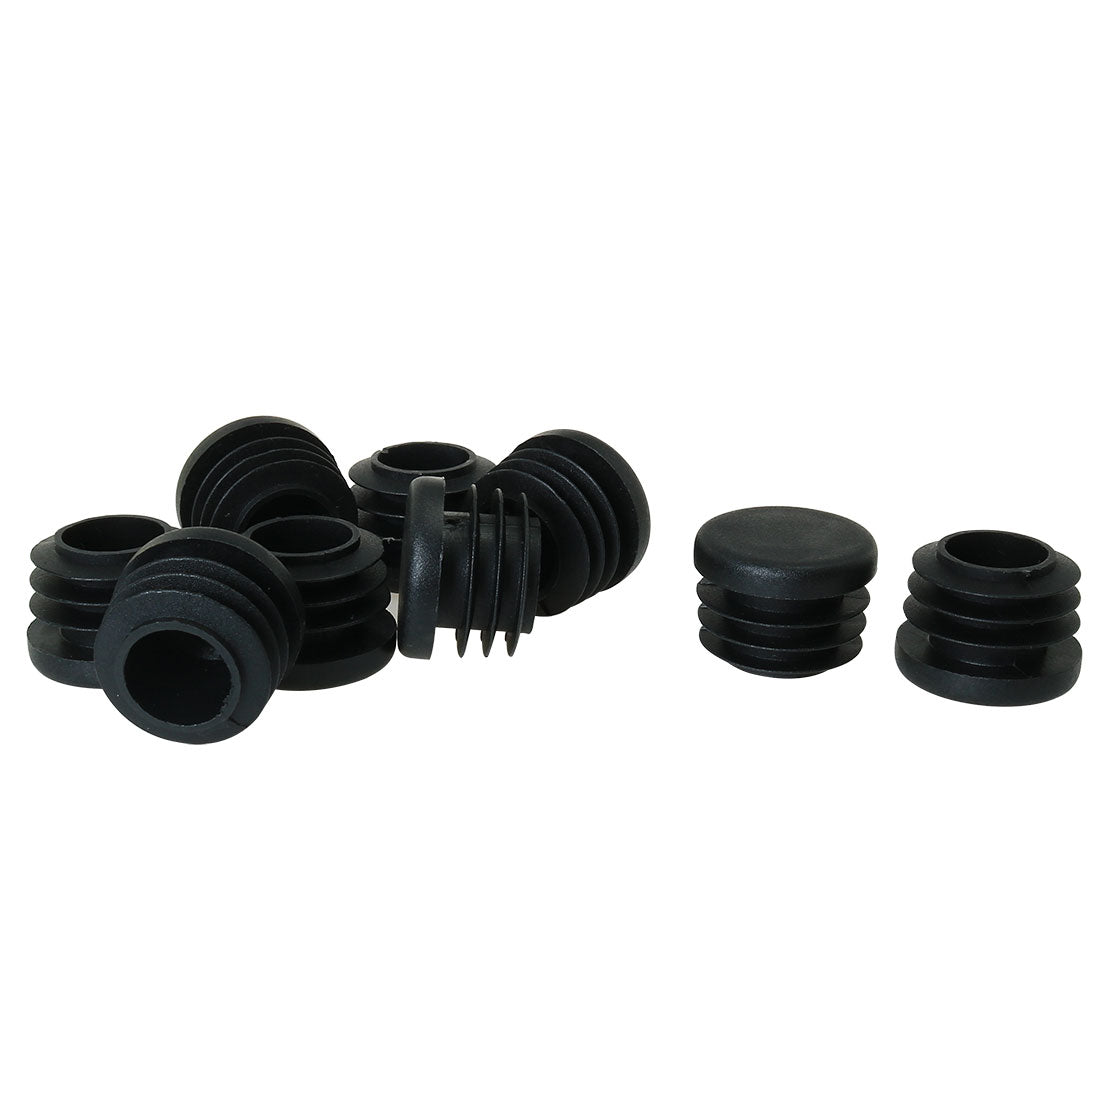 Uxcell Uxcell 50mm 2" OD Plastic Tube Inserts Pipe End Blank Caps 9pcs, 1.85"-1.93" Inner Dia, for Steel Legs Bung